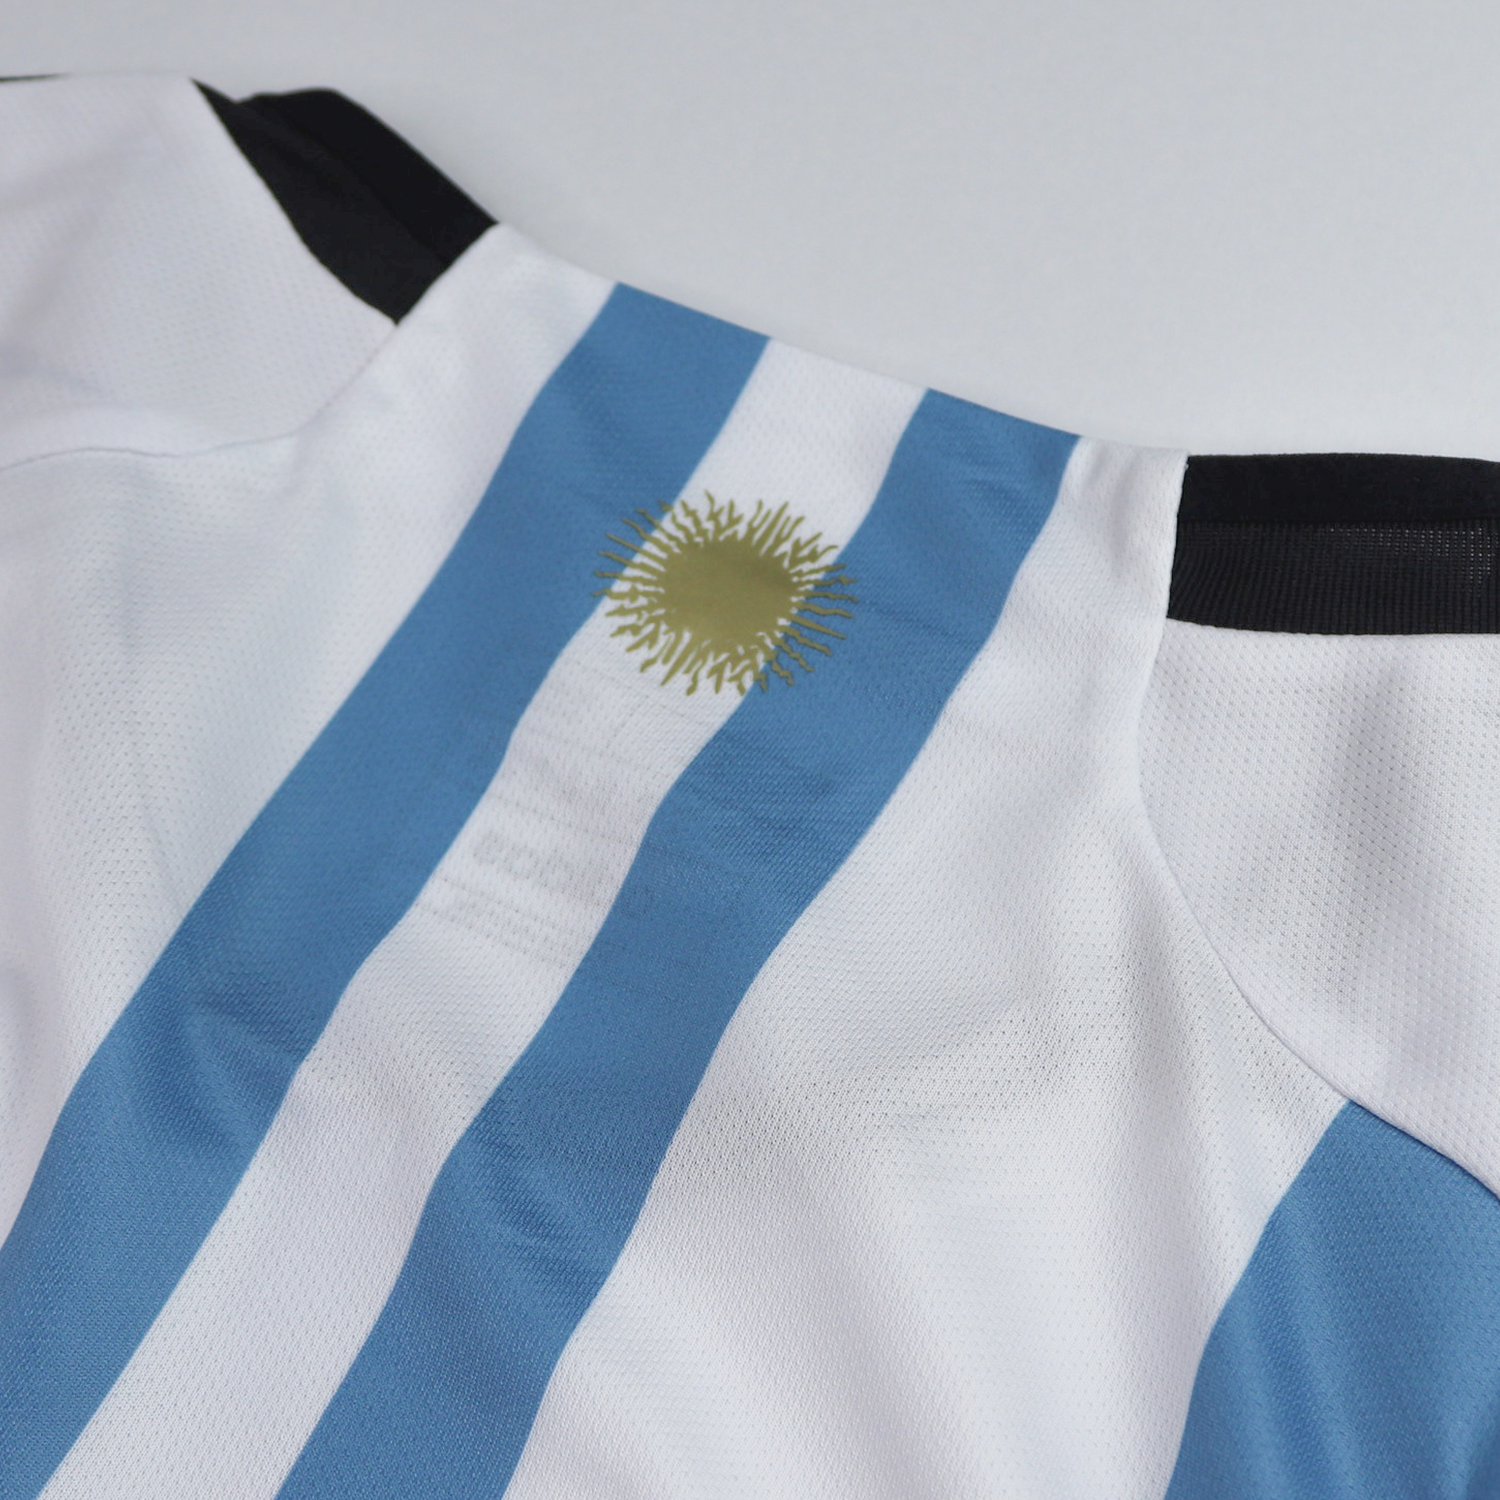 ARGENTINA 2022 World Cup Premium Home Jersey (Fan Edition)